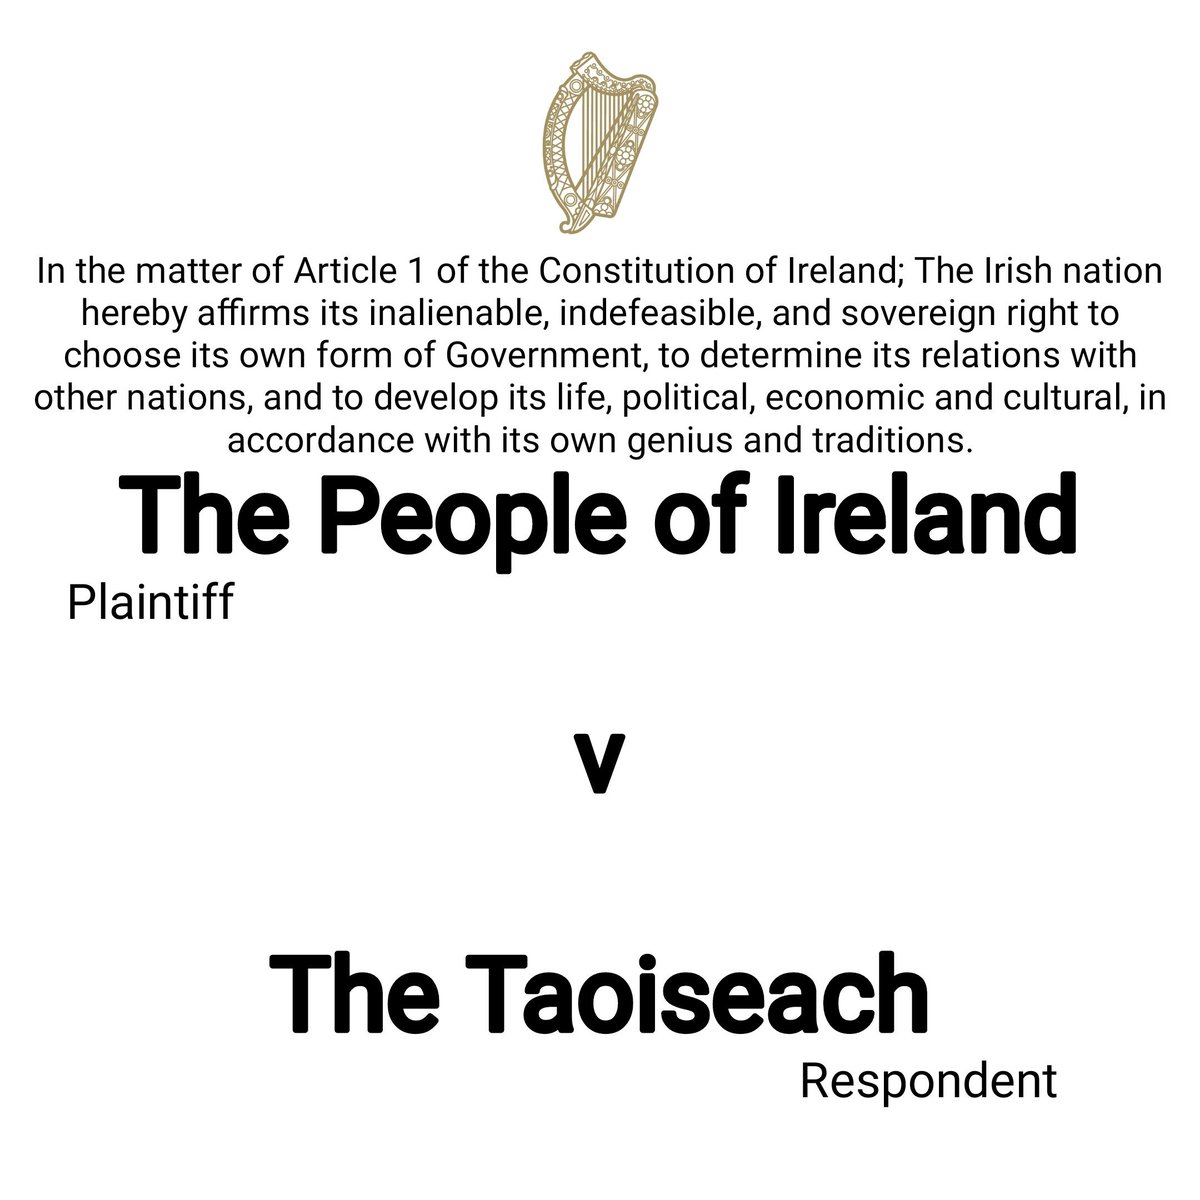 I’m initiating a Class Action High Court Civil lawsuit against the Taoiseach on behalf of the People of Ireland. This action will allow us to file public complaints and seek proper redress, harnessing our constitutional rights under Article 40. Remember, there are no adverse